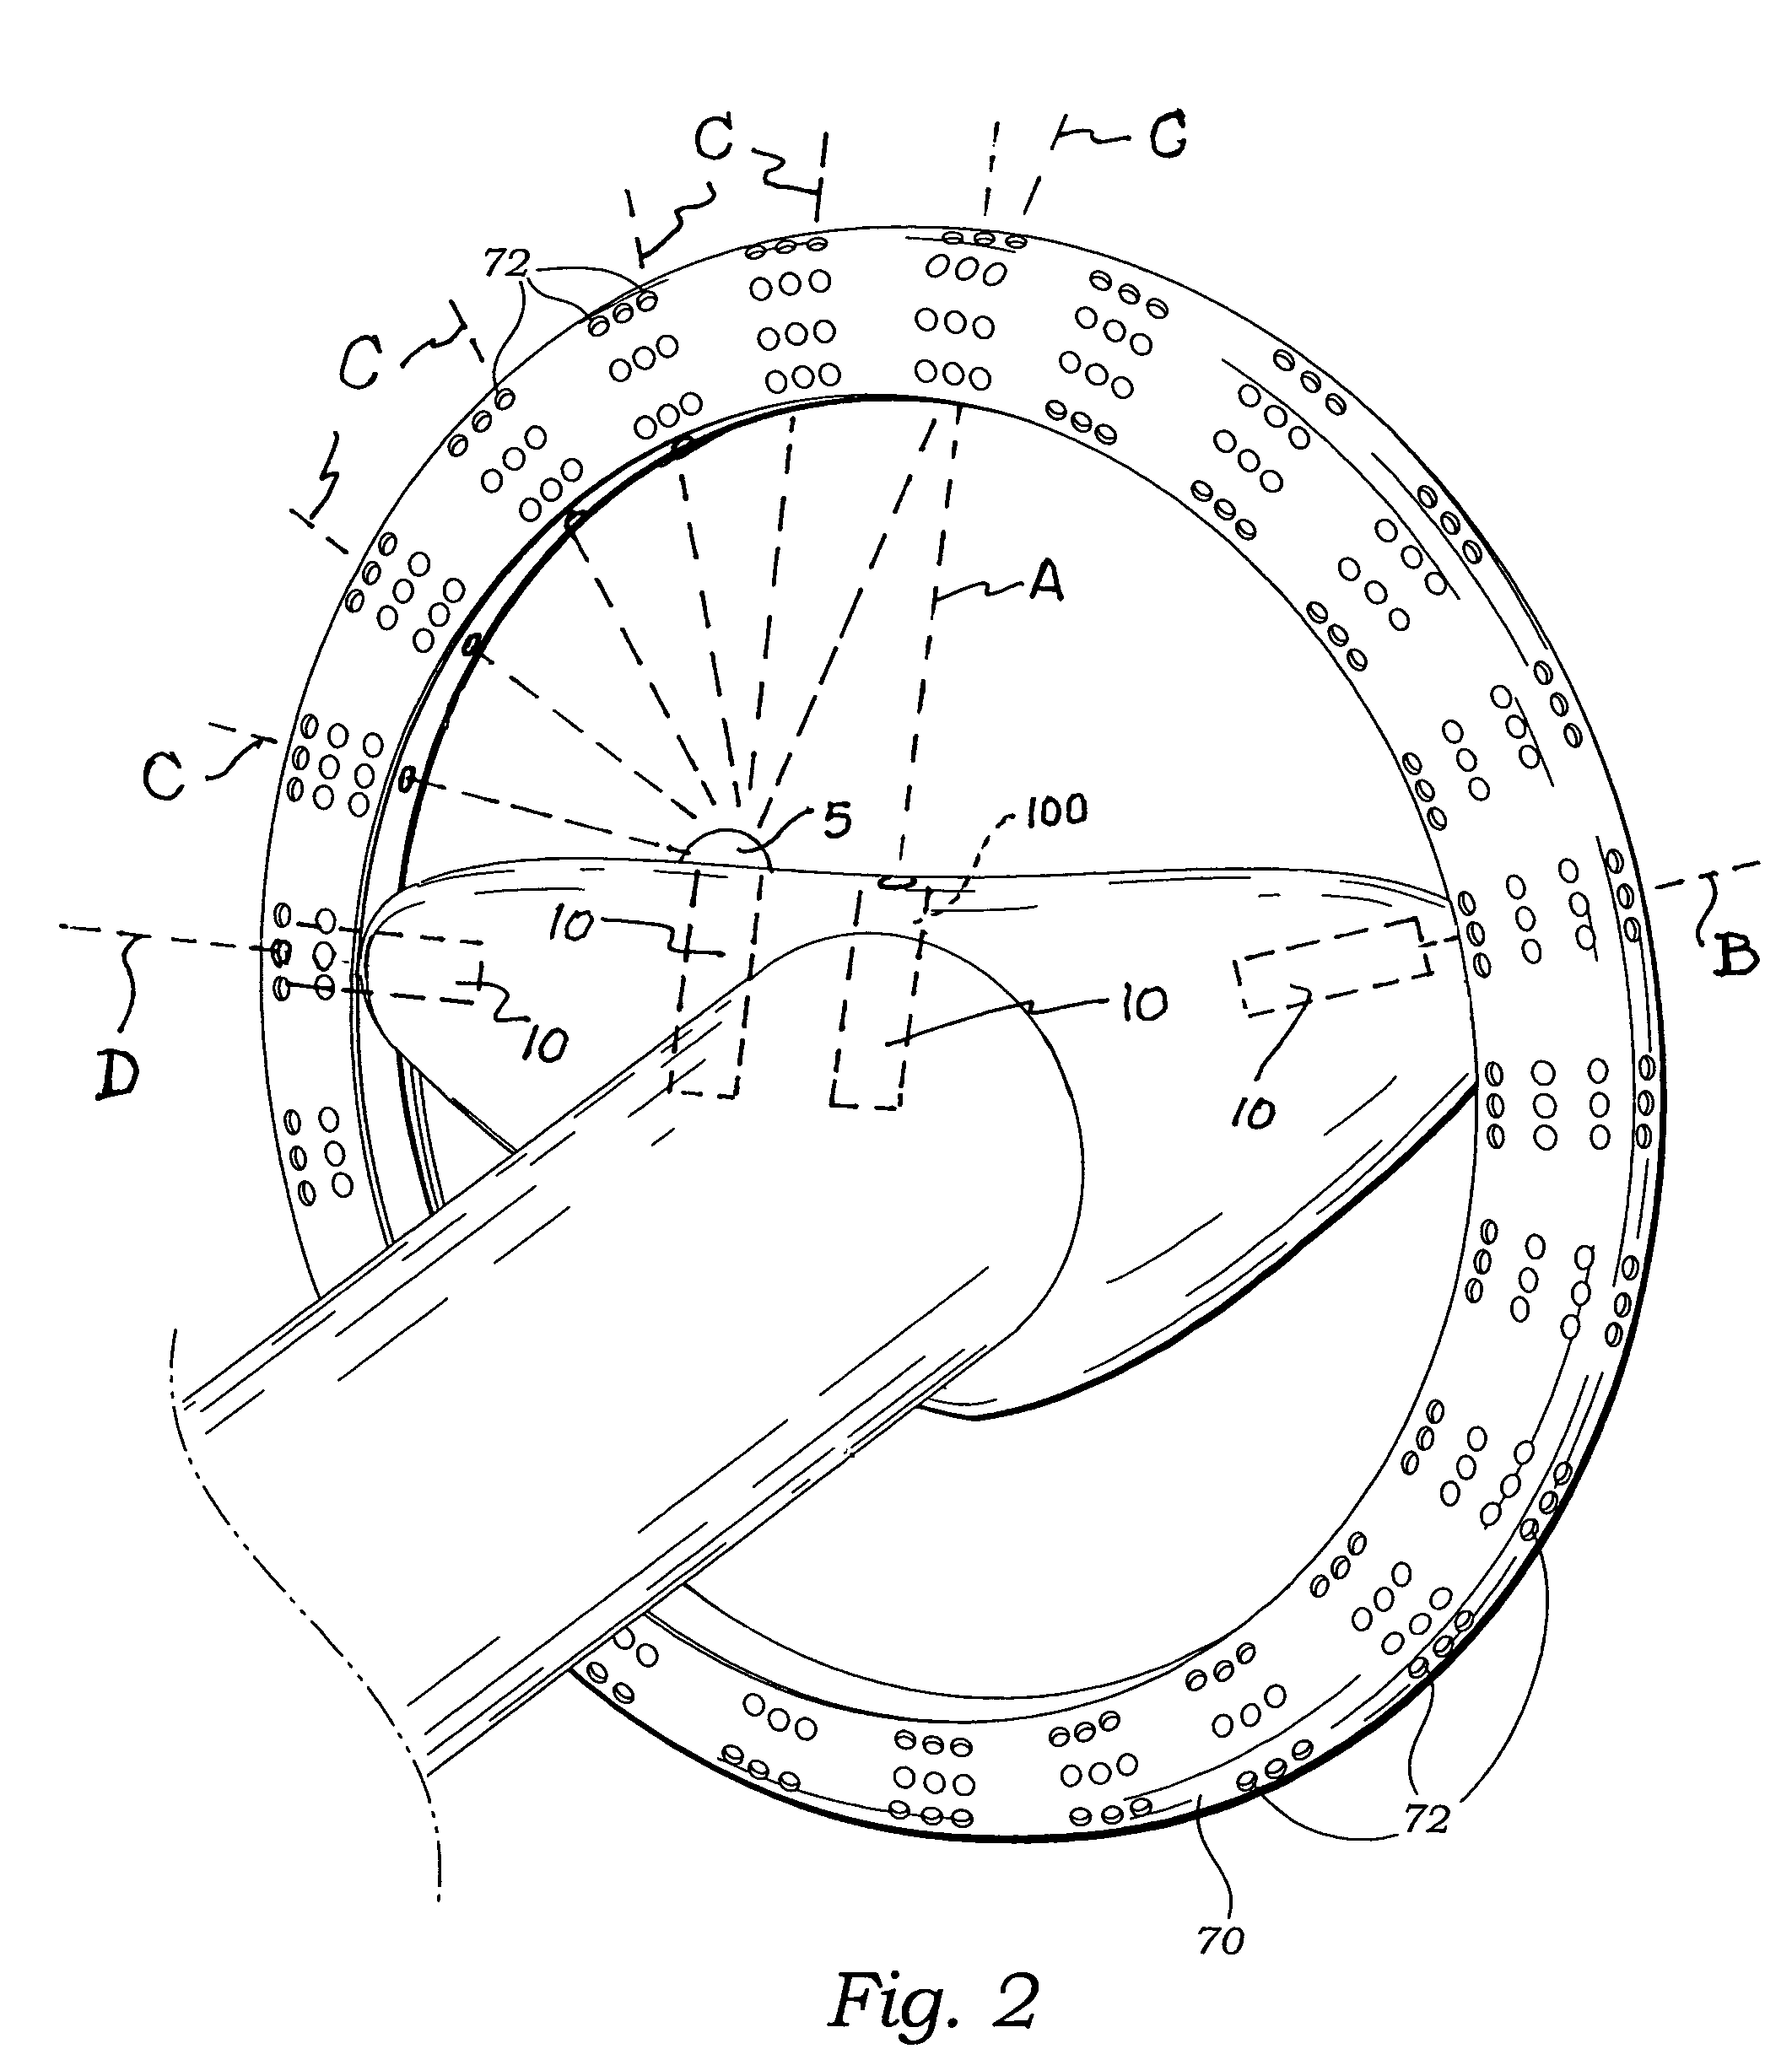 Substance detection and alarm using a spectrometer built into a steering wheel assembly